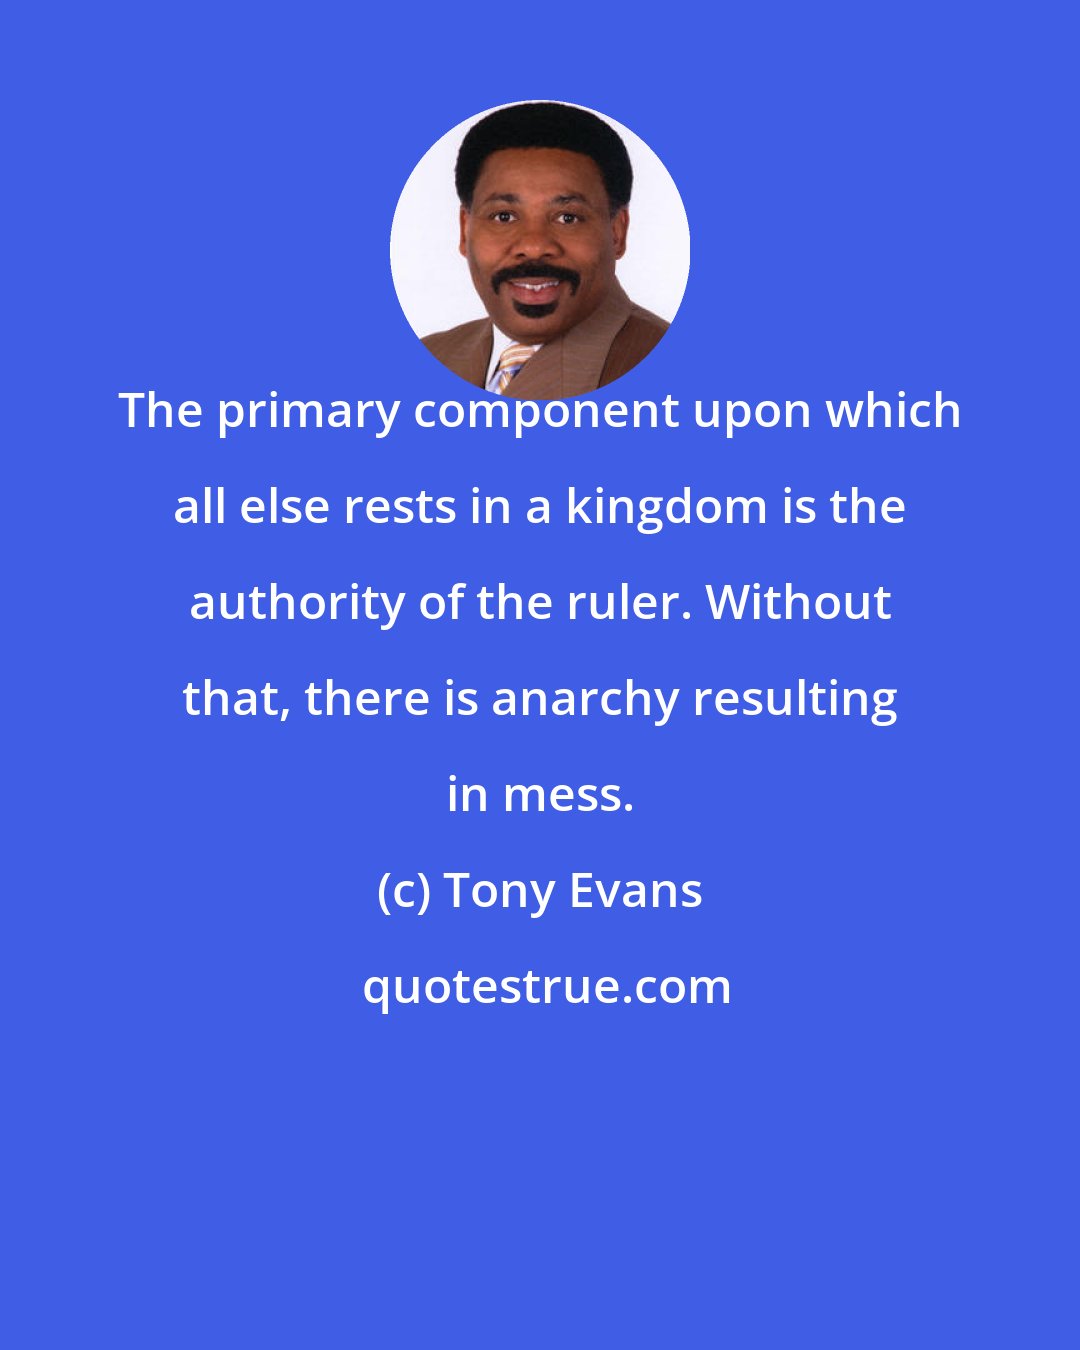 Tony Evans: The primary component upon which all else rests in a kingdom is the authority of the ruler. Without that, there is anarchy resulting in mess.